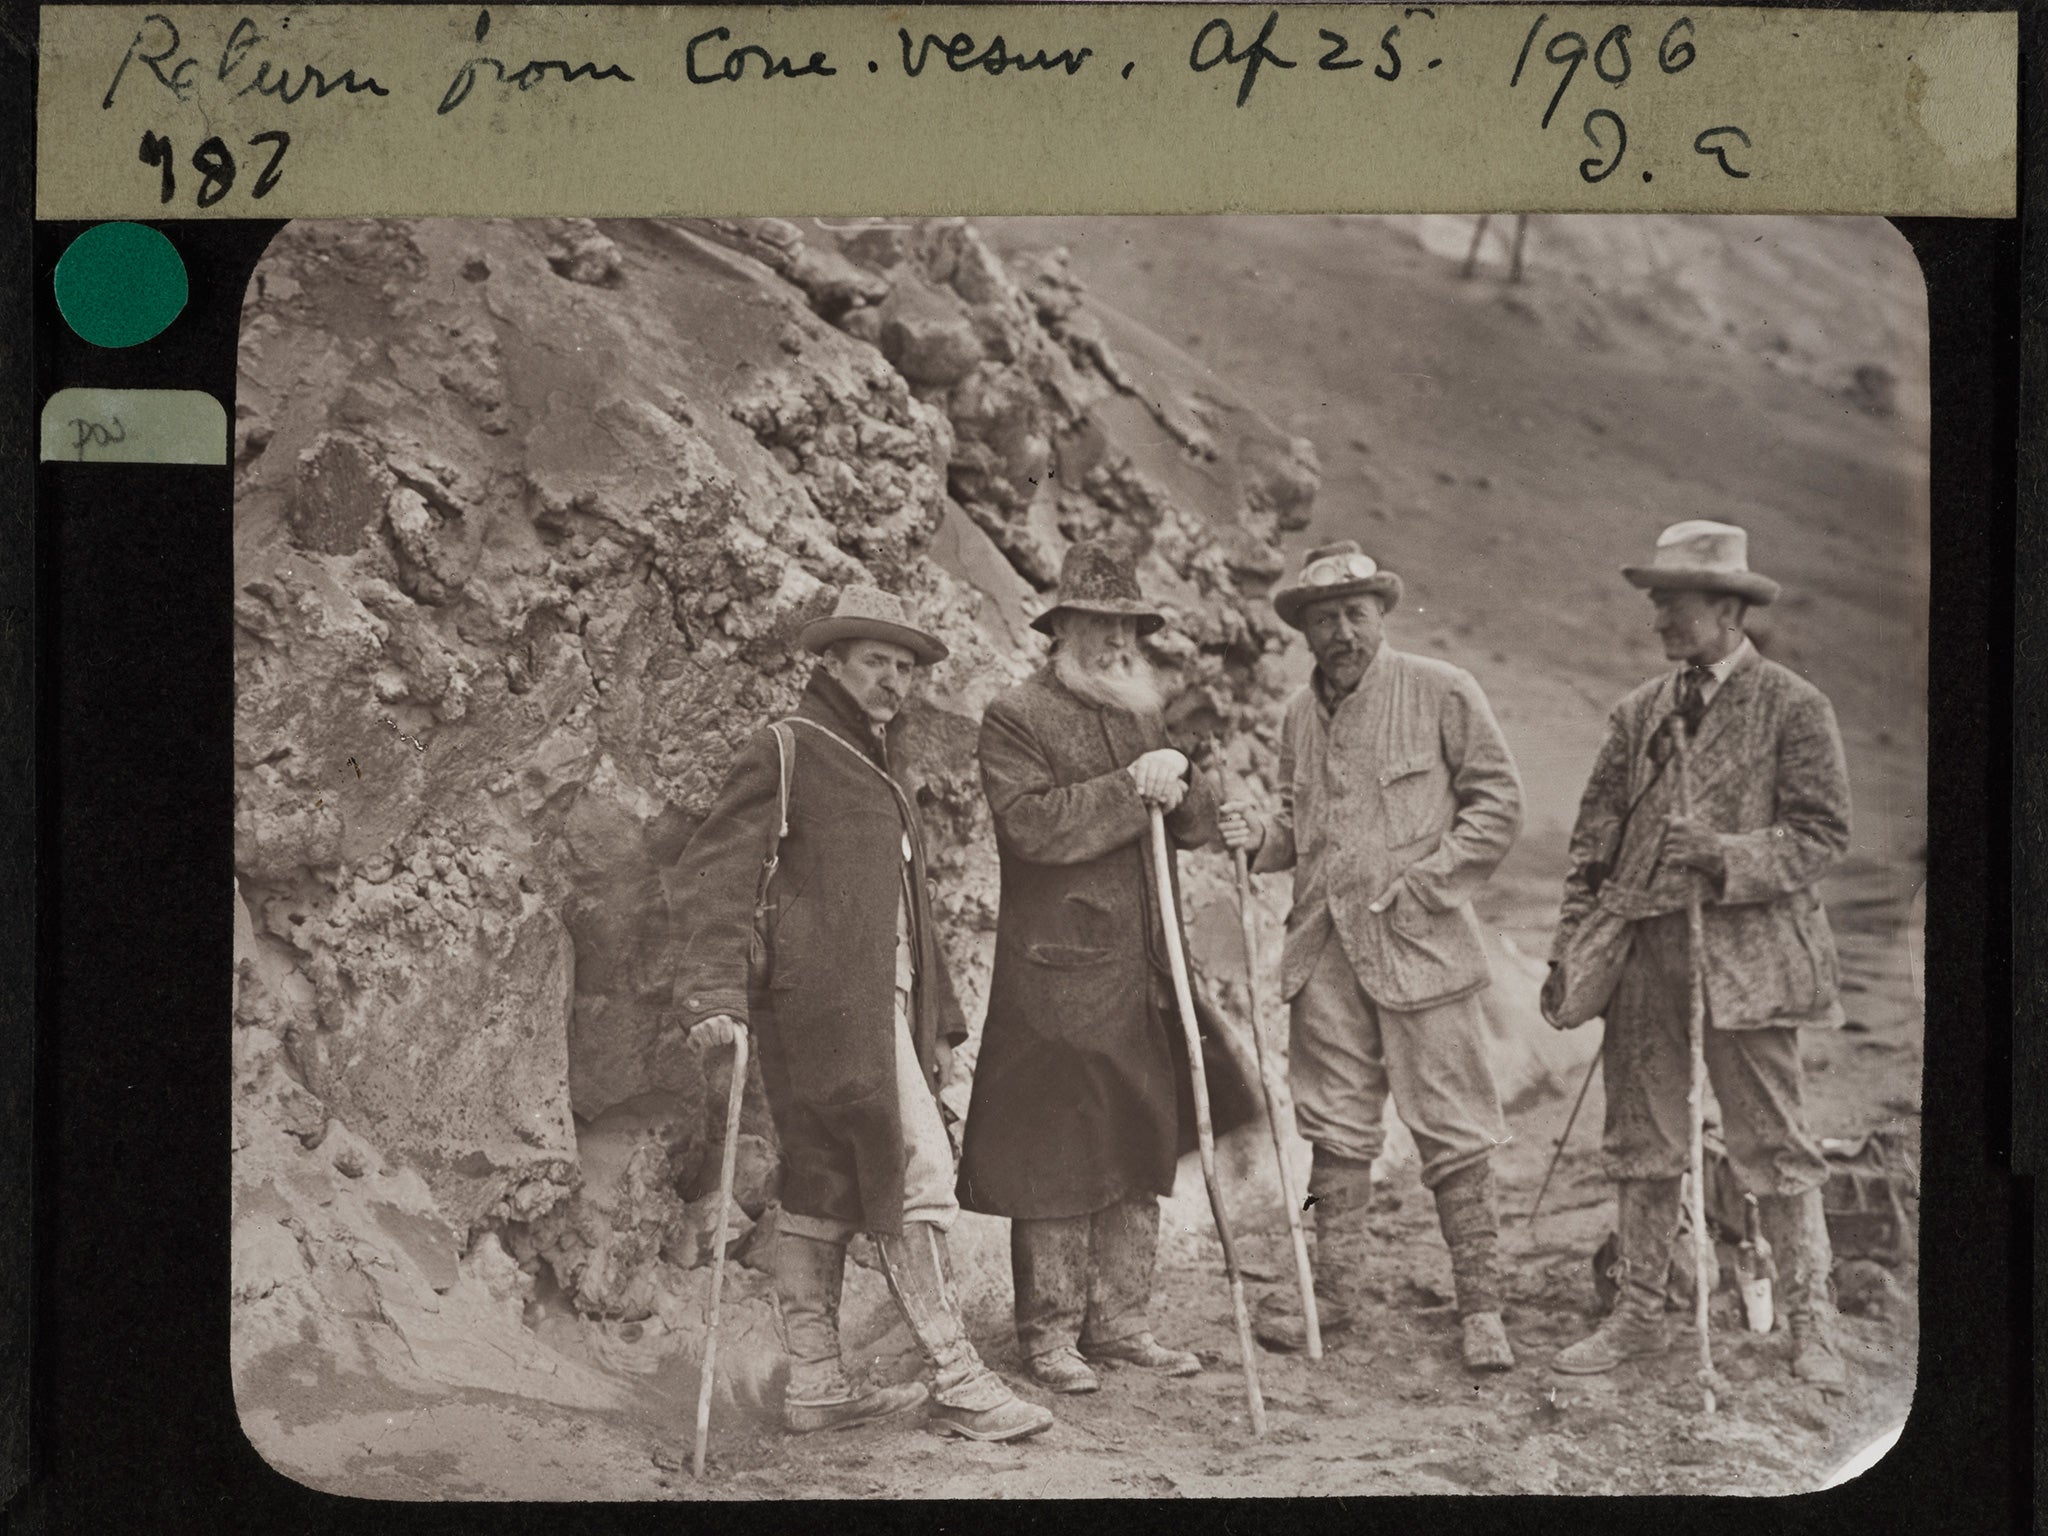 Tempest Anderson (second from right) and three others returning from Mount Vesuvius